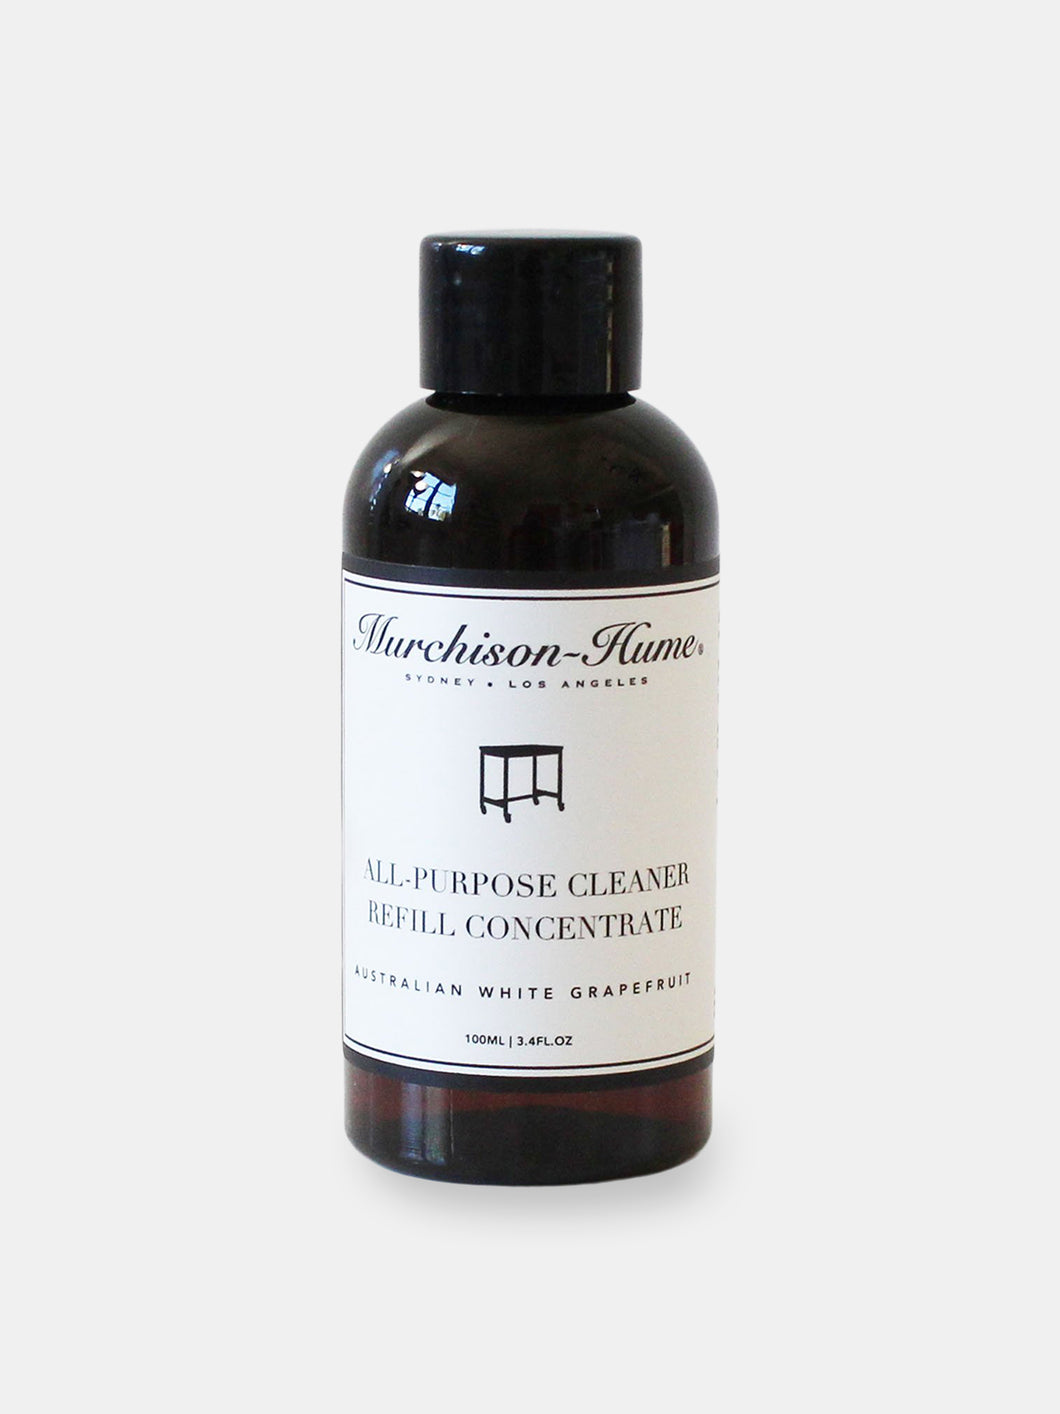 All-Purpose Cleaner Refill Concentrates